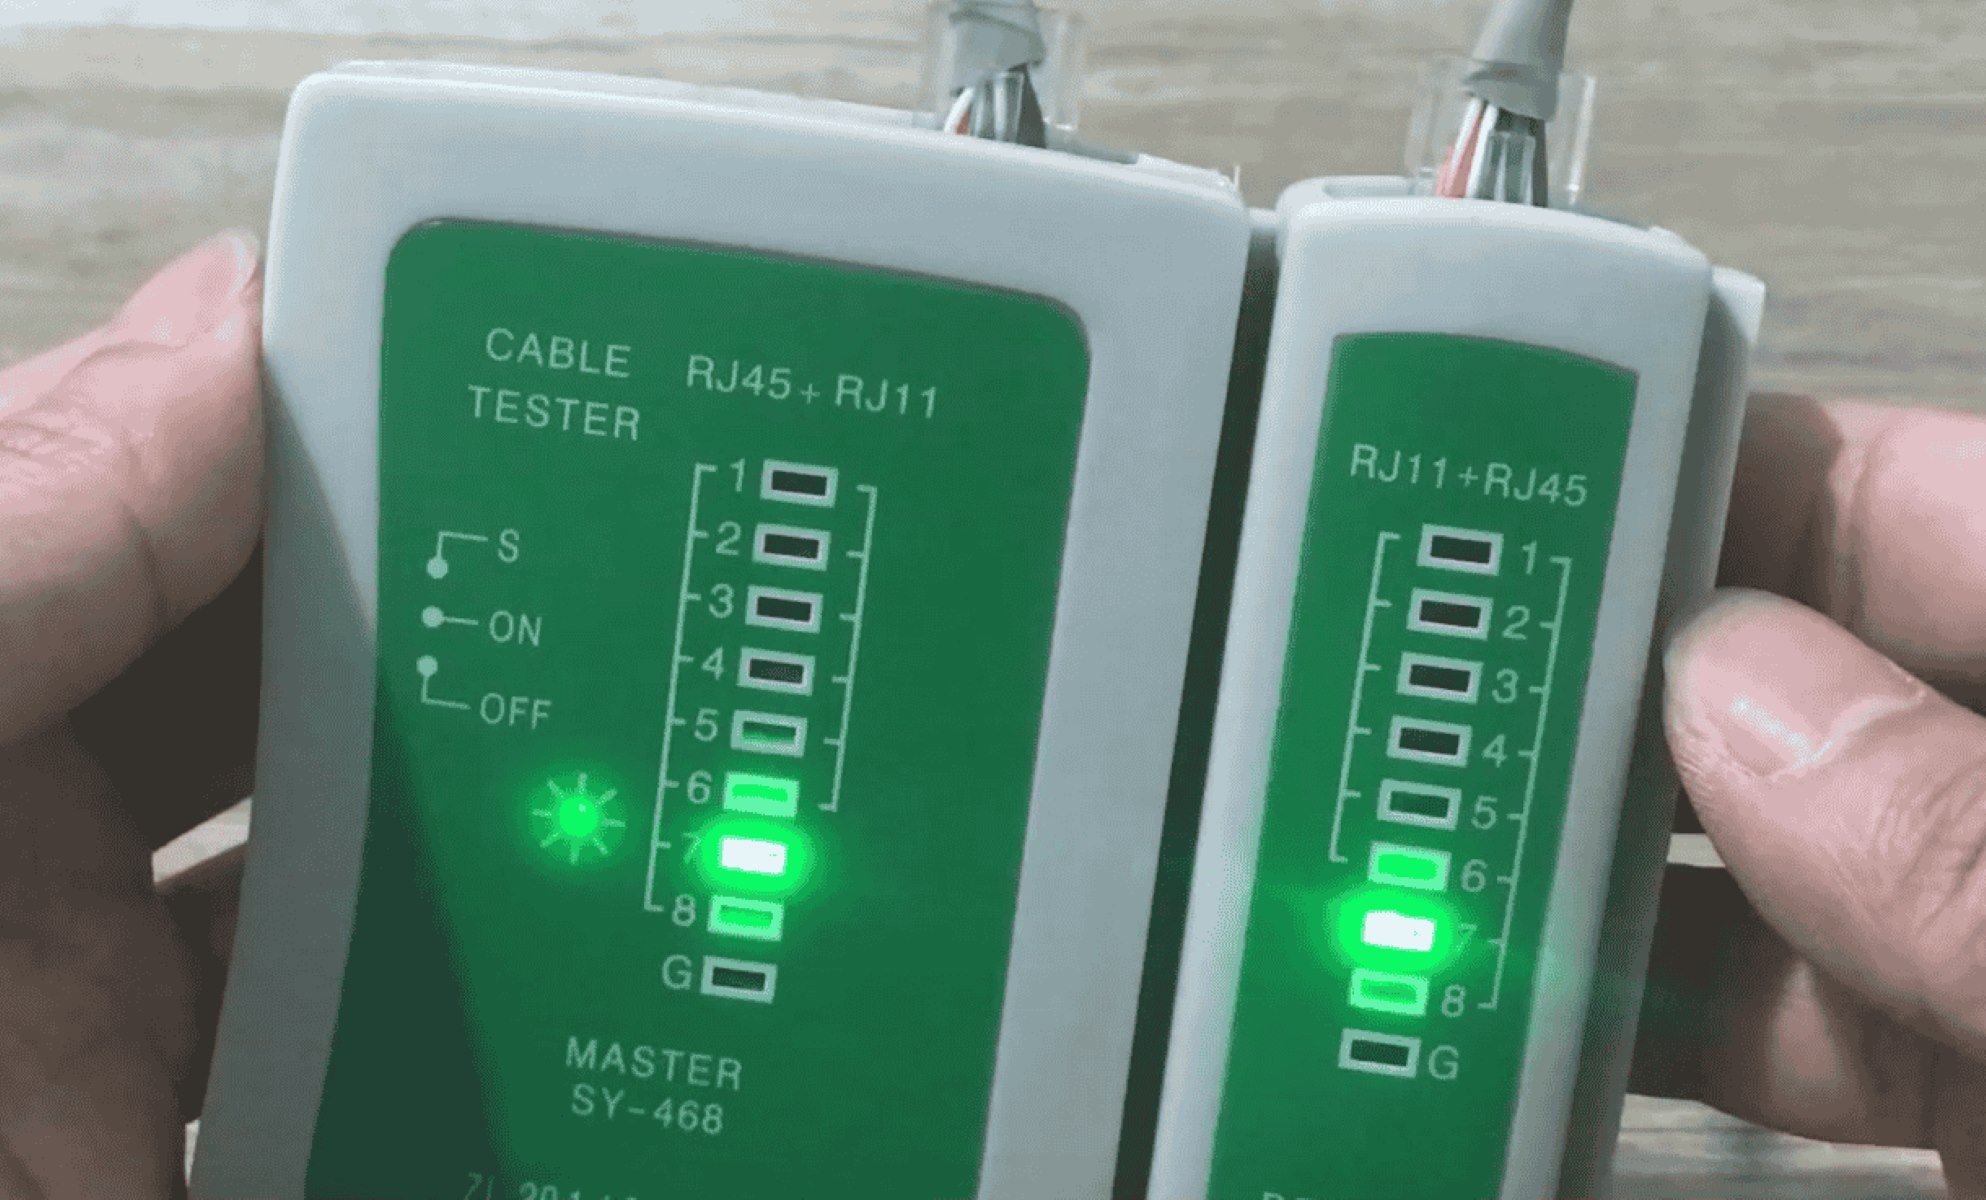 How To Use Ethernet Cable Tester